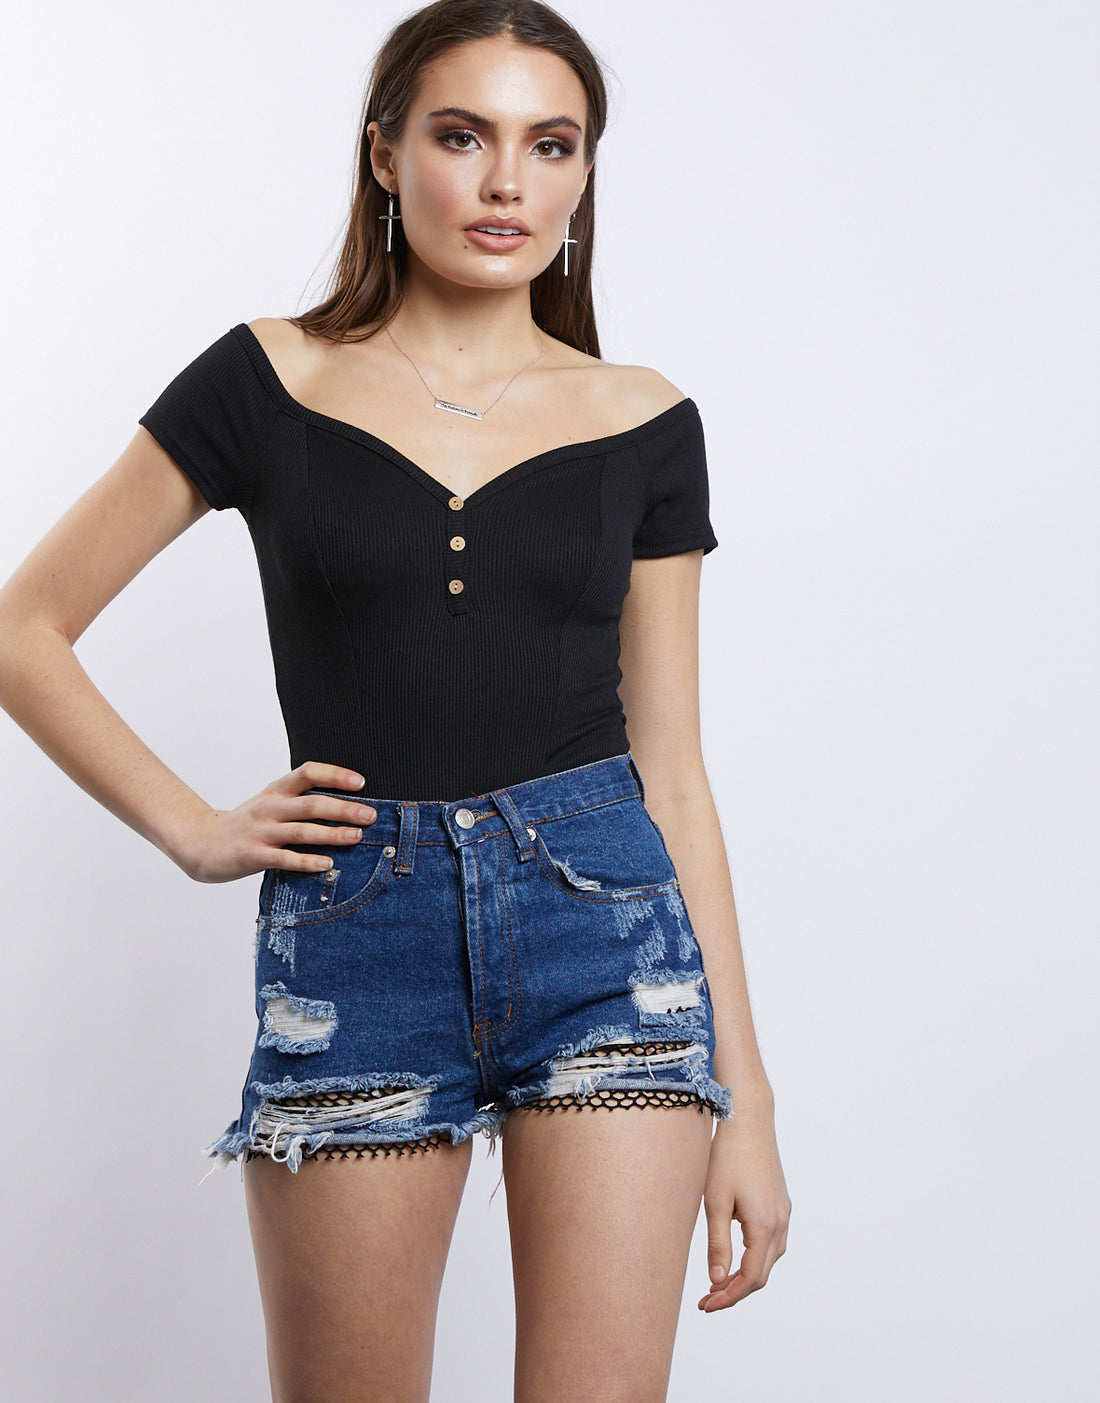 Alissa Off The Shoulder Bodysuit Tops Black Small -2020AVE